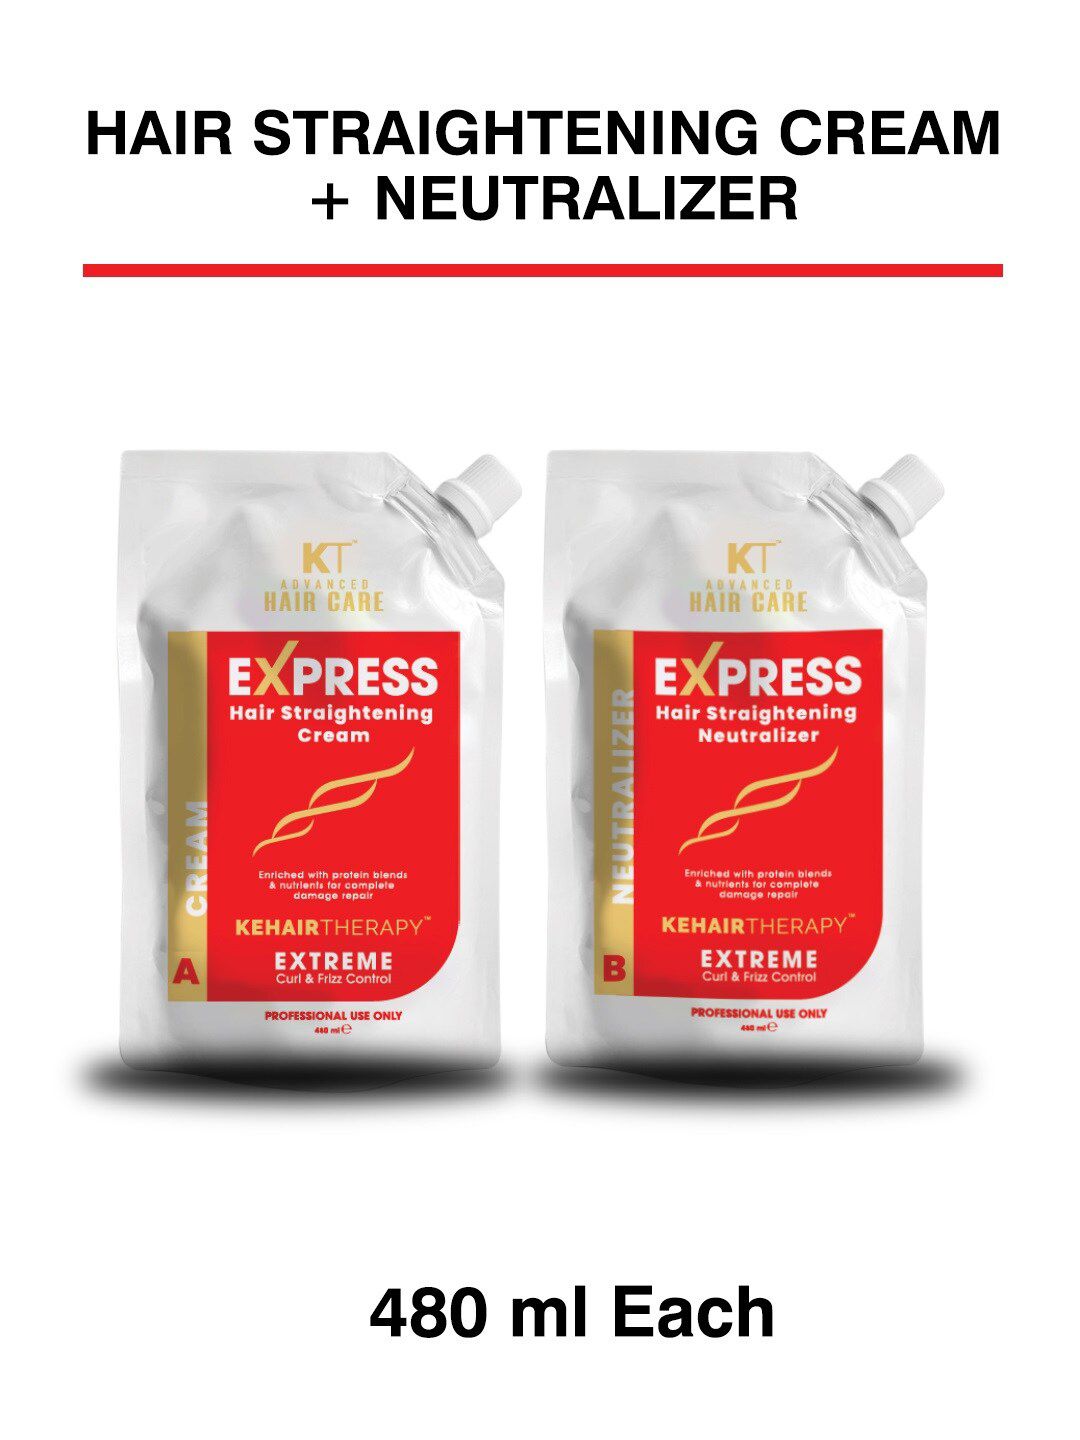 KEHAIRTHERAPY Combo of Express Hair Straightening Cream & Neutralizer - 480 ml Each Price in India